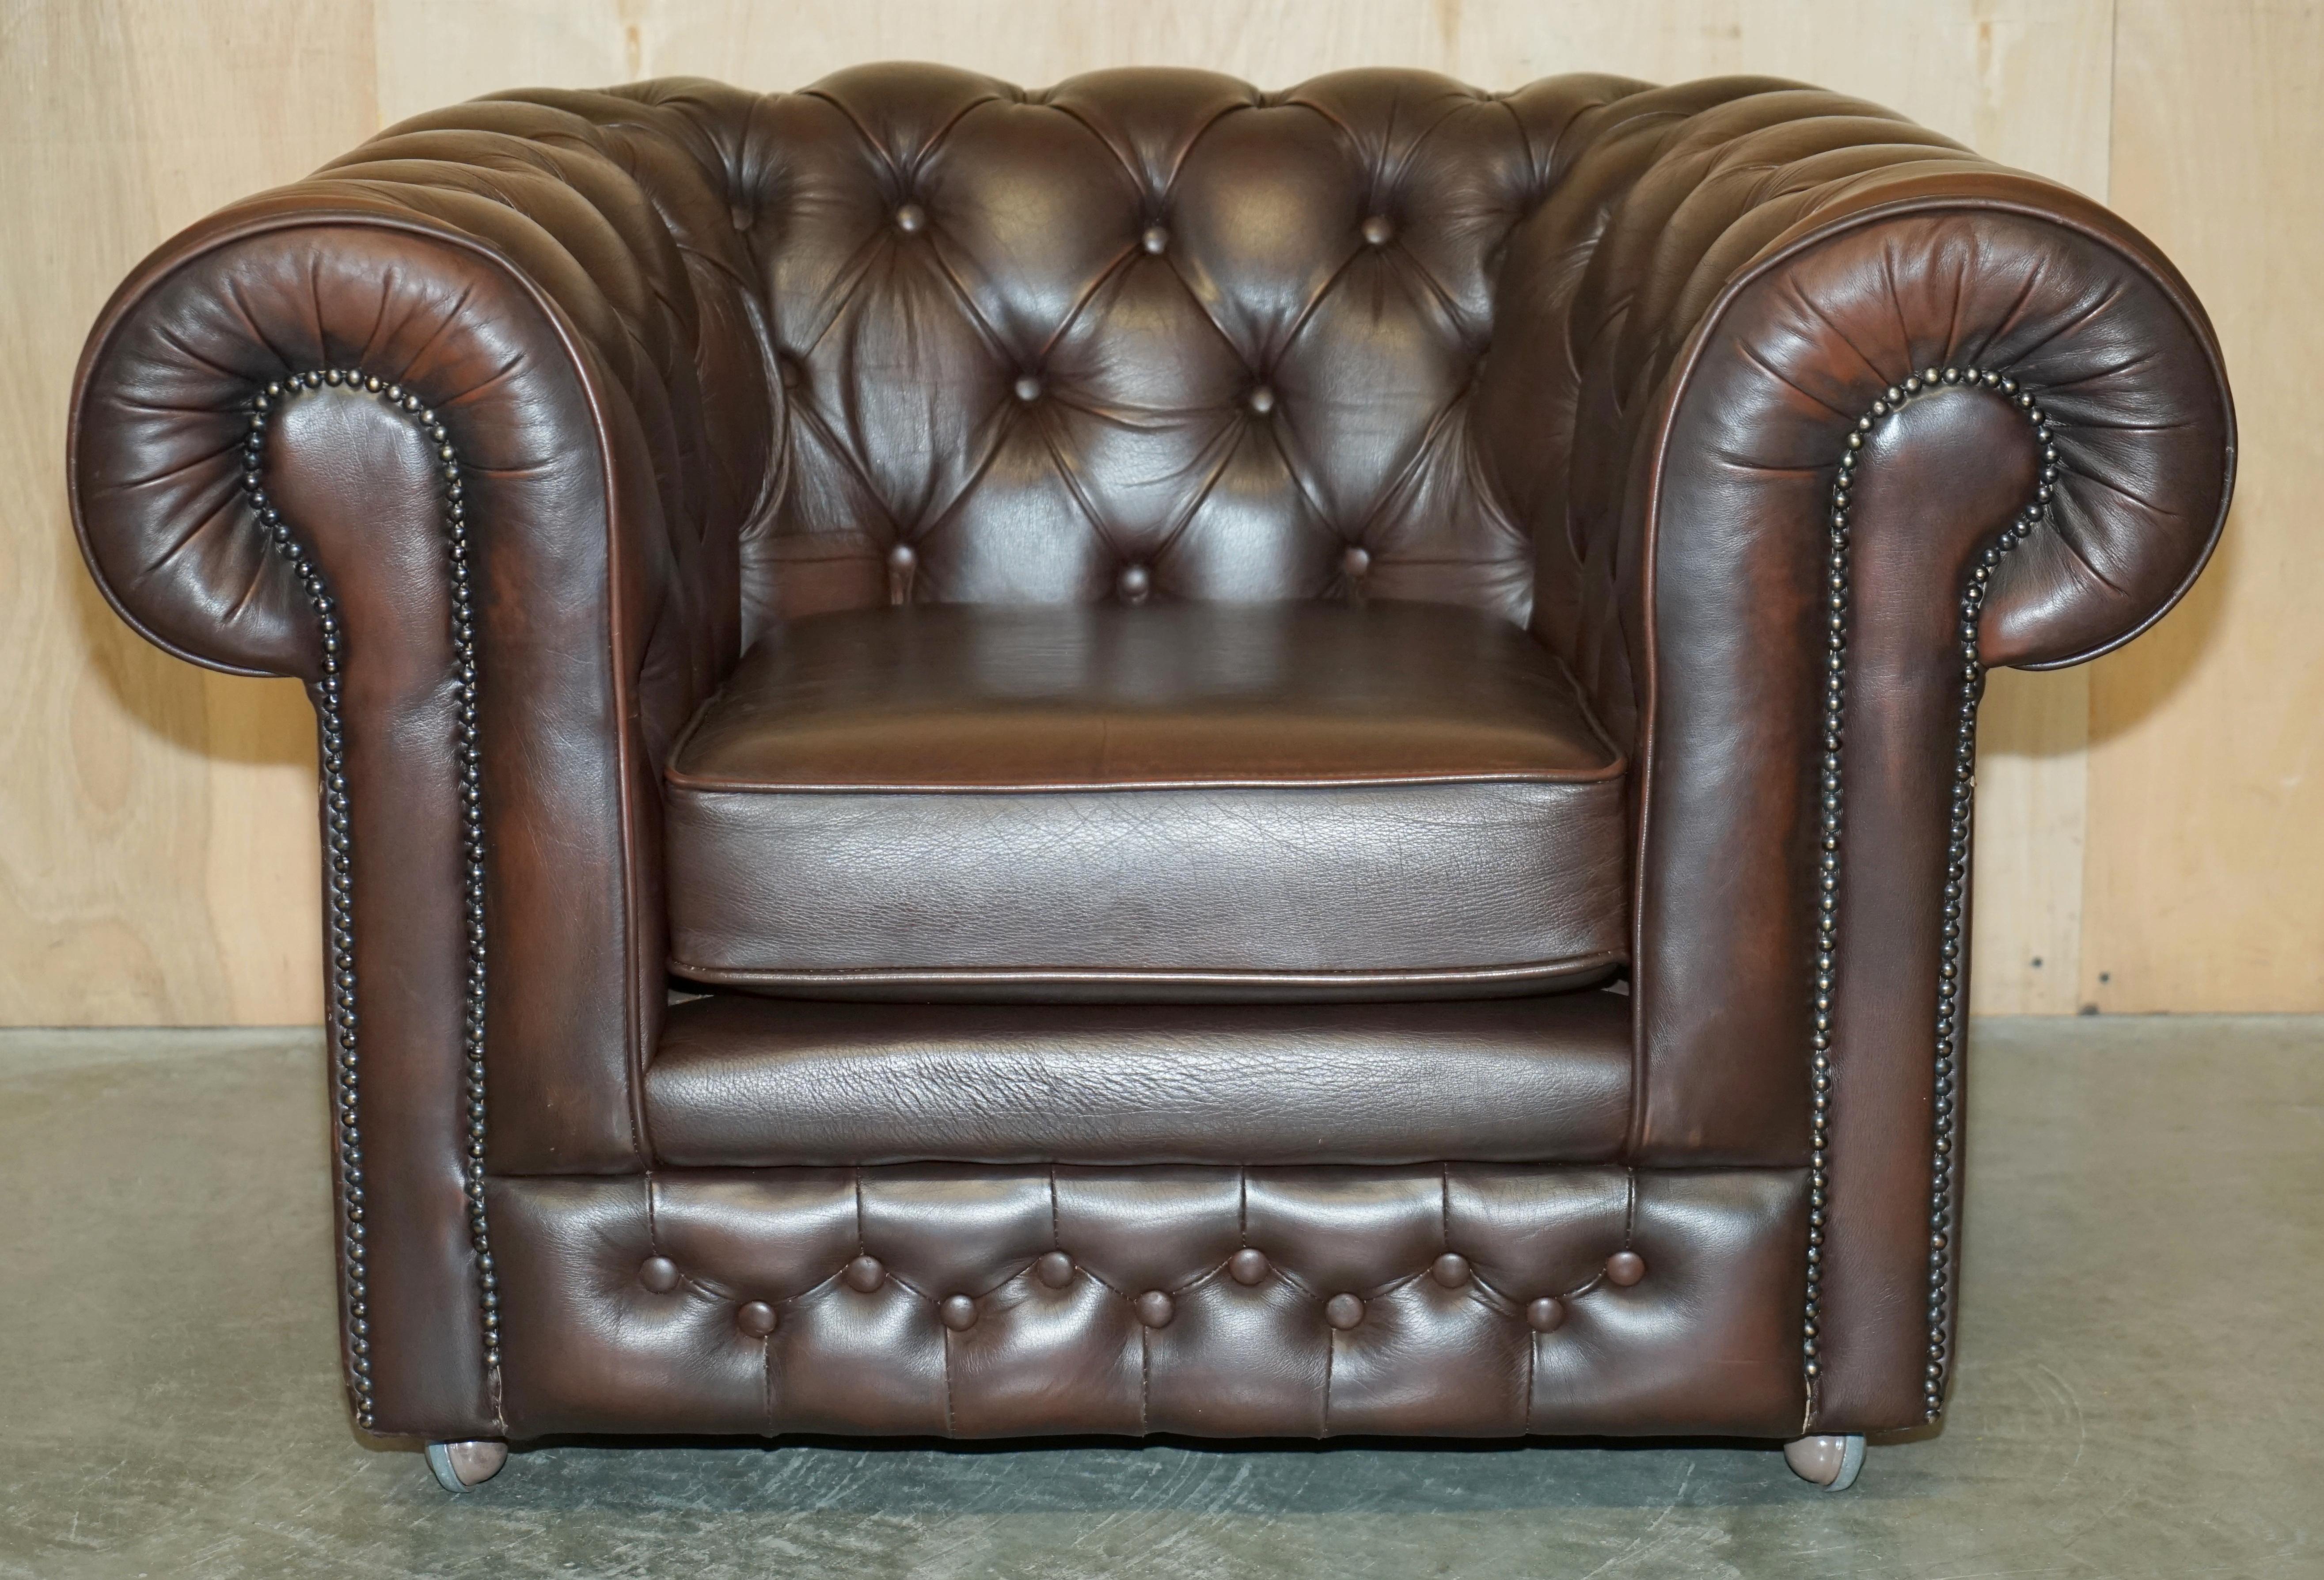 Royal House Antiques

Royal House Antiques is delighted to offer for sale this very nice vintage Chesterfield brown leather armchair made by Thomas Lloyd England 

Please note the delivery fee listed is just a guide, it covers within the M25 only